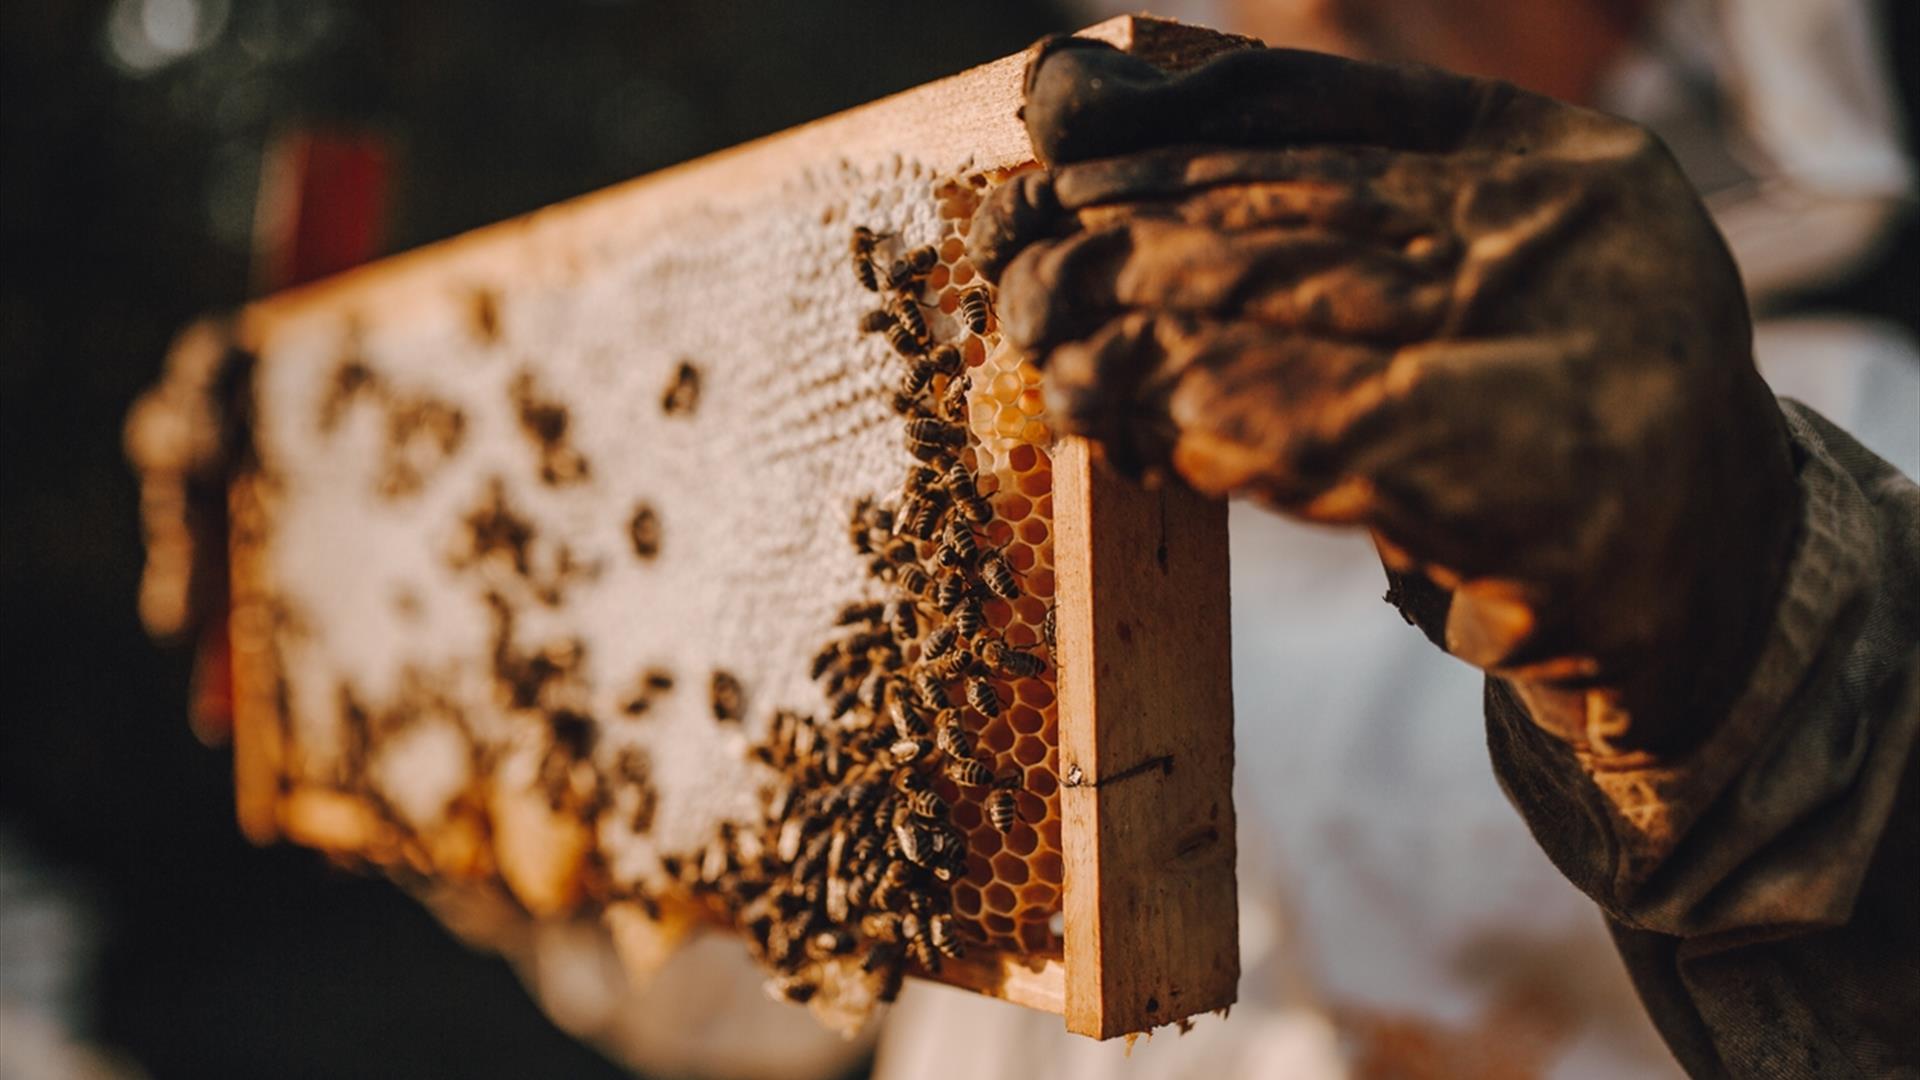 Image is of a beekeeper holding a hive full of bees